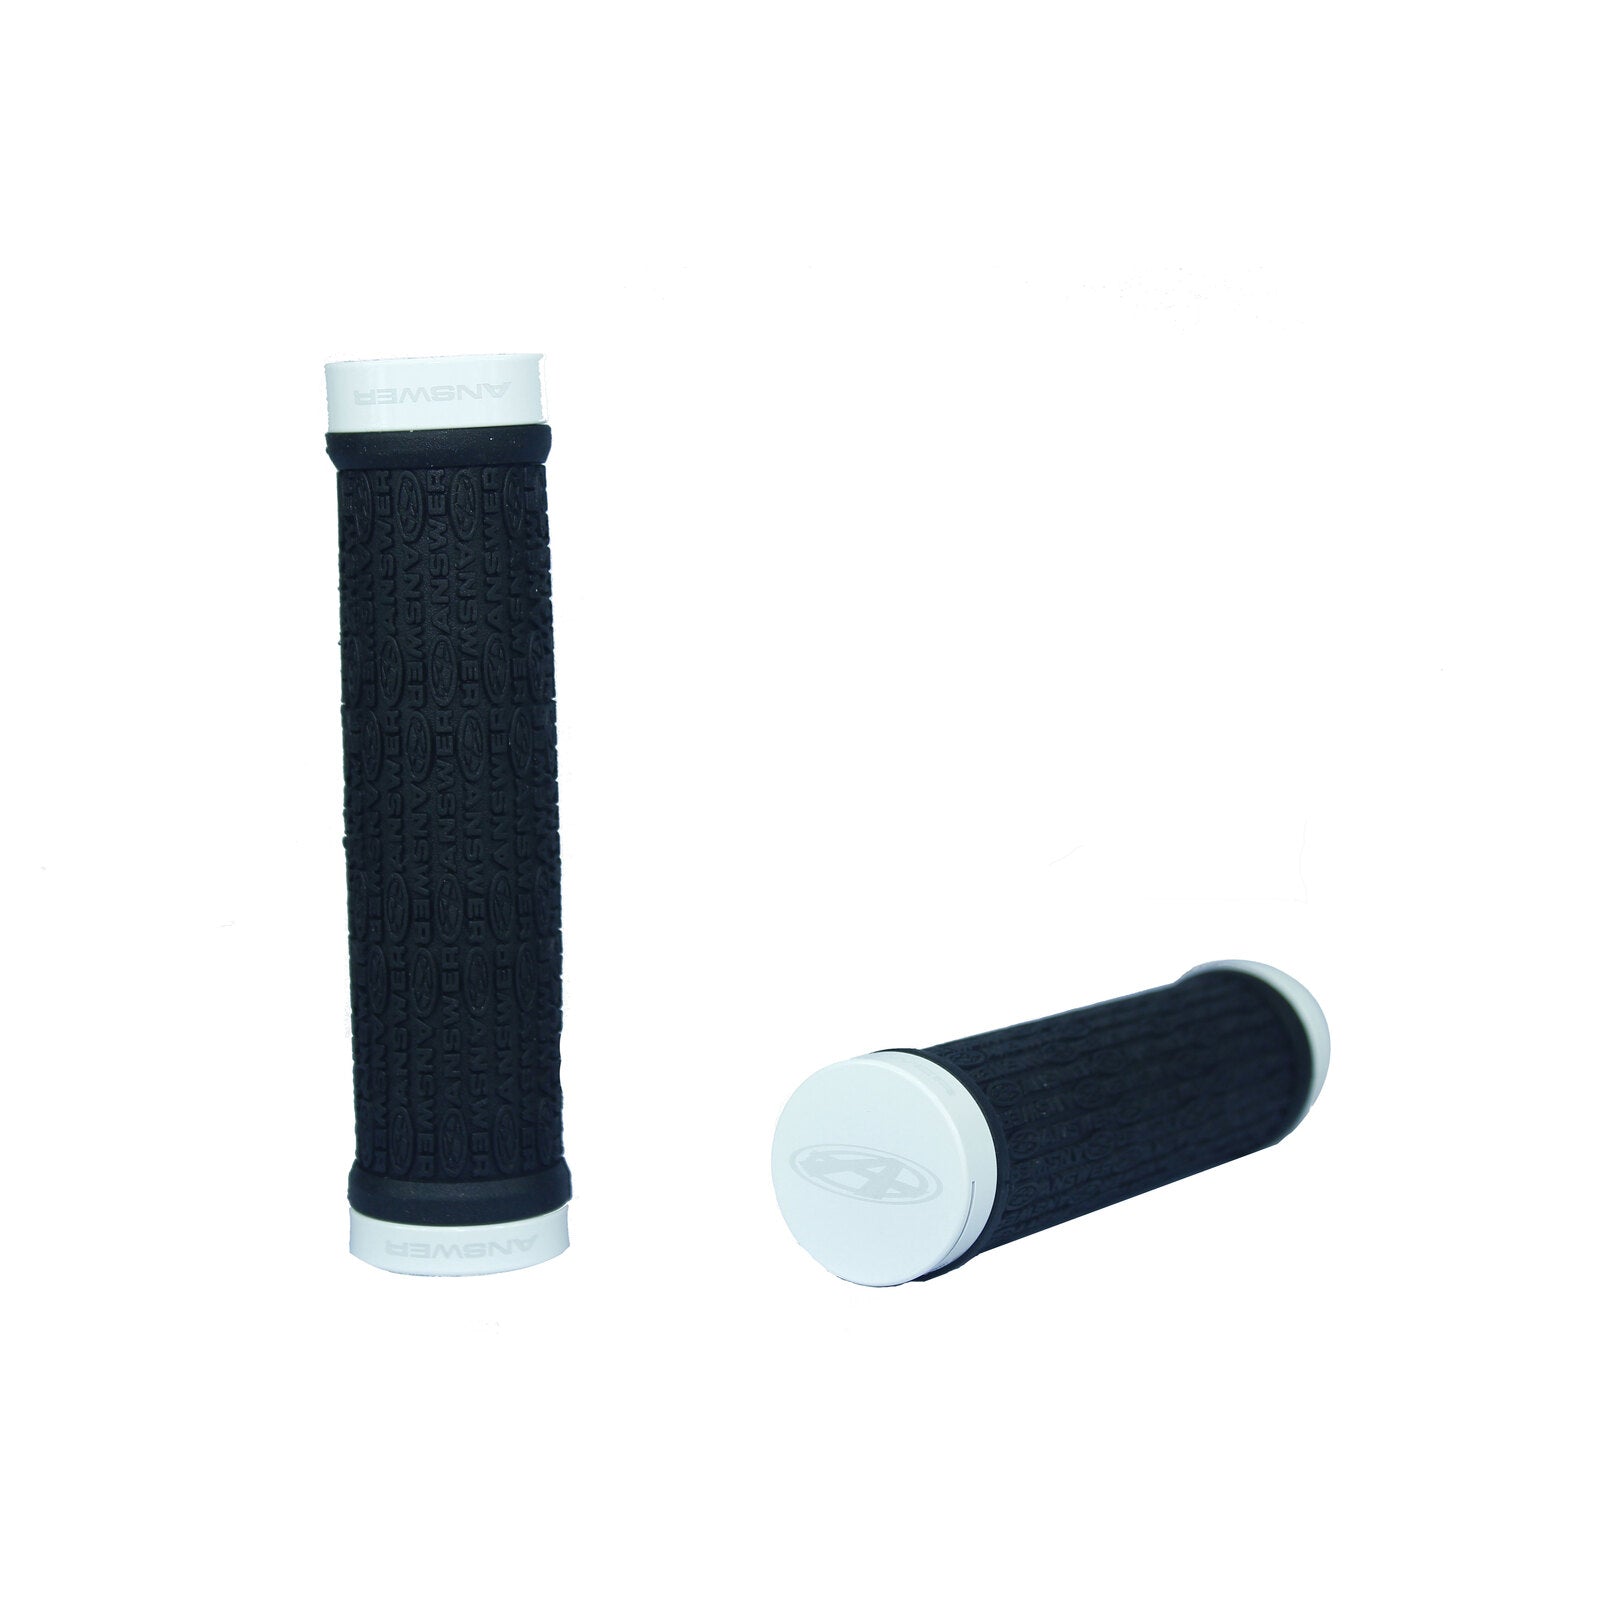 A pair of black Answer Pro Lock-On Flangless Grips, on a white background.